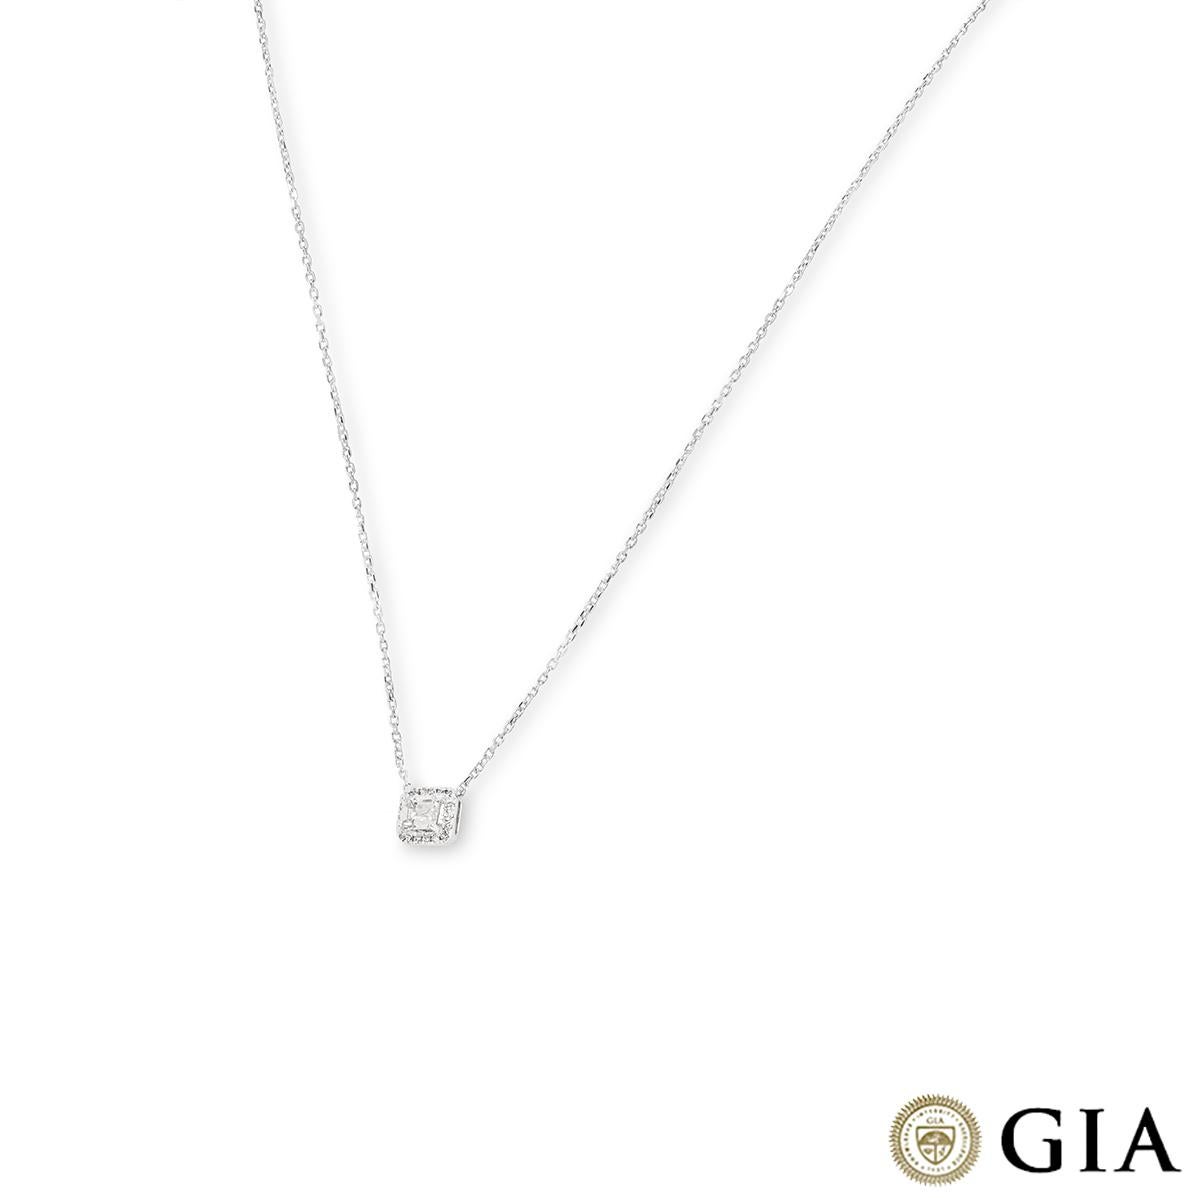 A chic 18k white gold diamond pendant. The pendant features an emerald cut diamond set to the centre weighing 0.51ct, F colour and VS1 clarity. Further accentuating the centre diamond are 18 round brilliant cut diamonds pave set in a halo with an